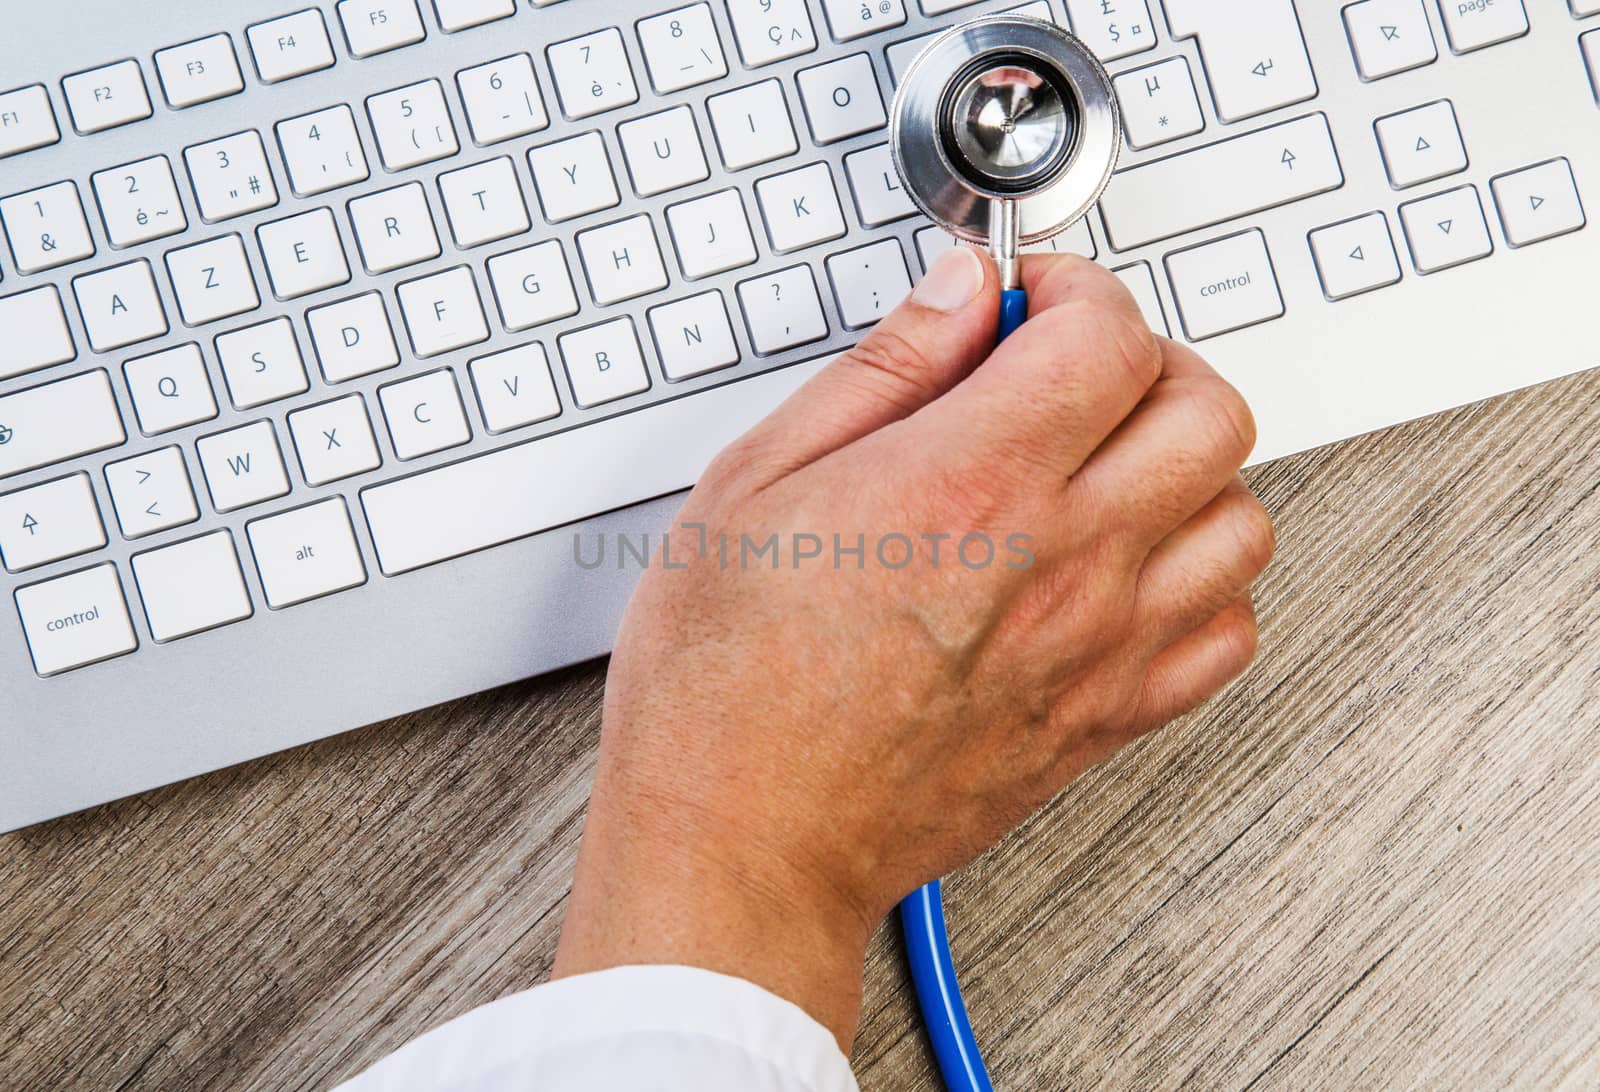 Expert examining a keyboard with stethoscope by pixinoo